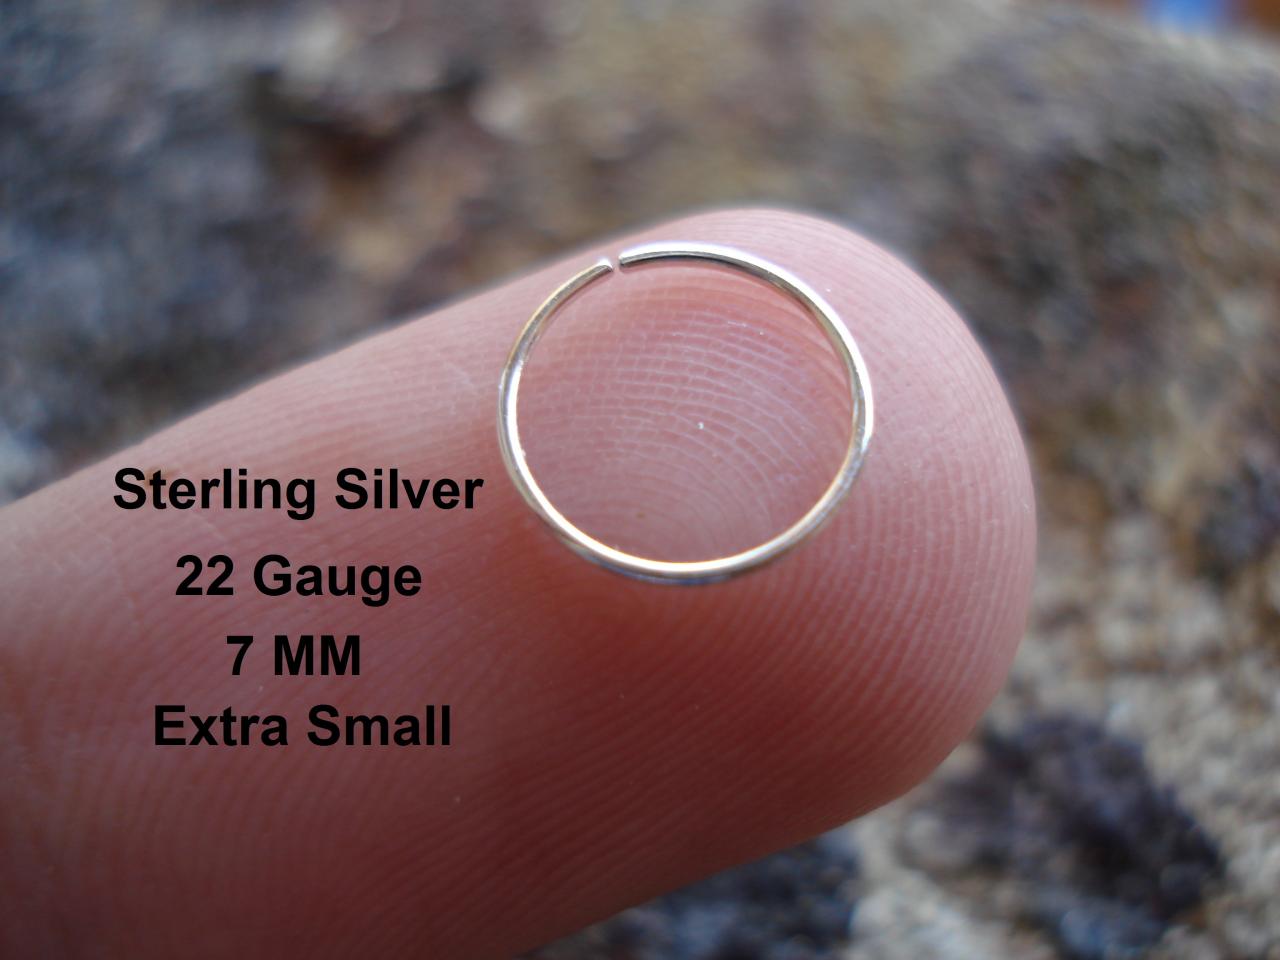 Extra Small 22 Gauge Sterling Silver For Nose Ring/hoop Helix/earring/tragus,7 Mm Inner Diameter